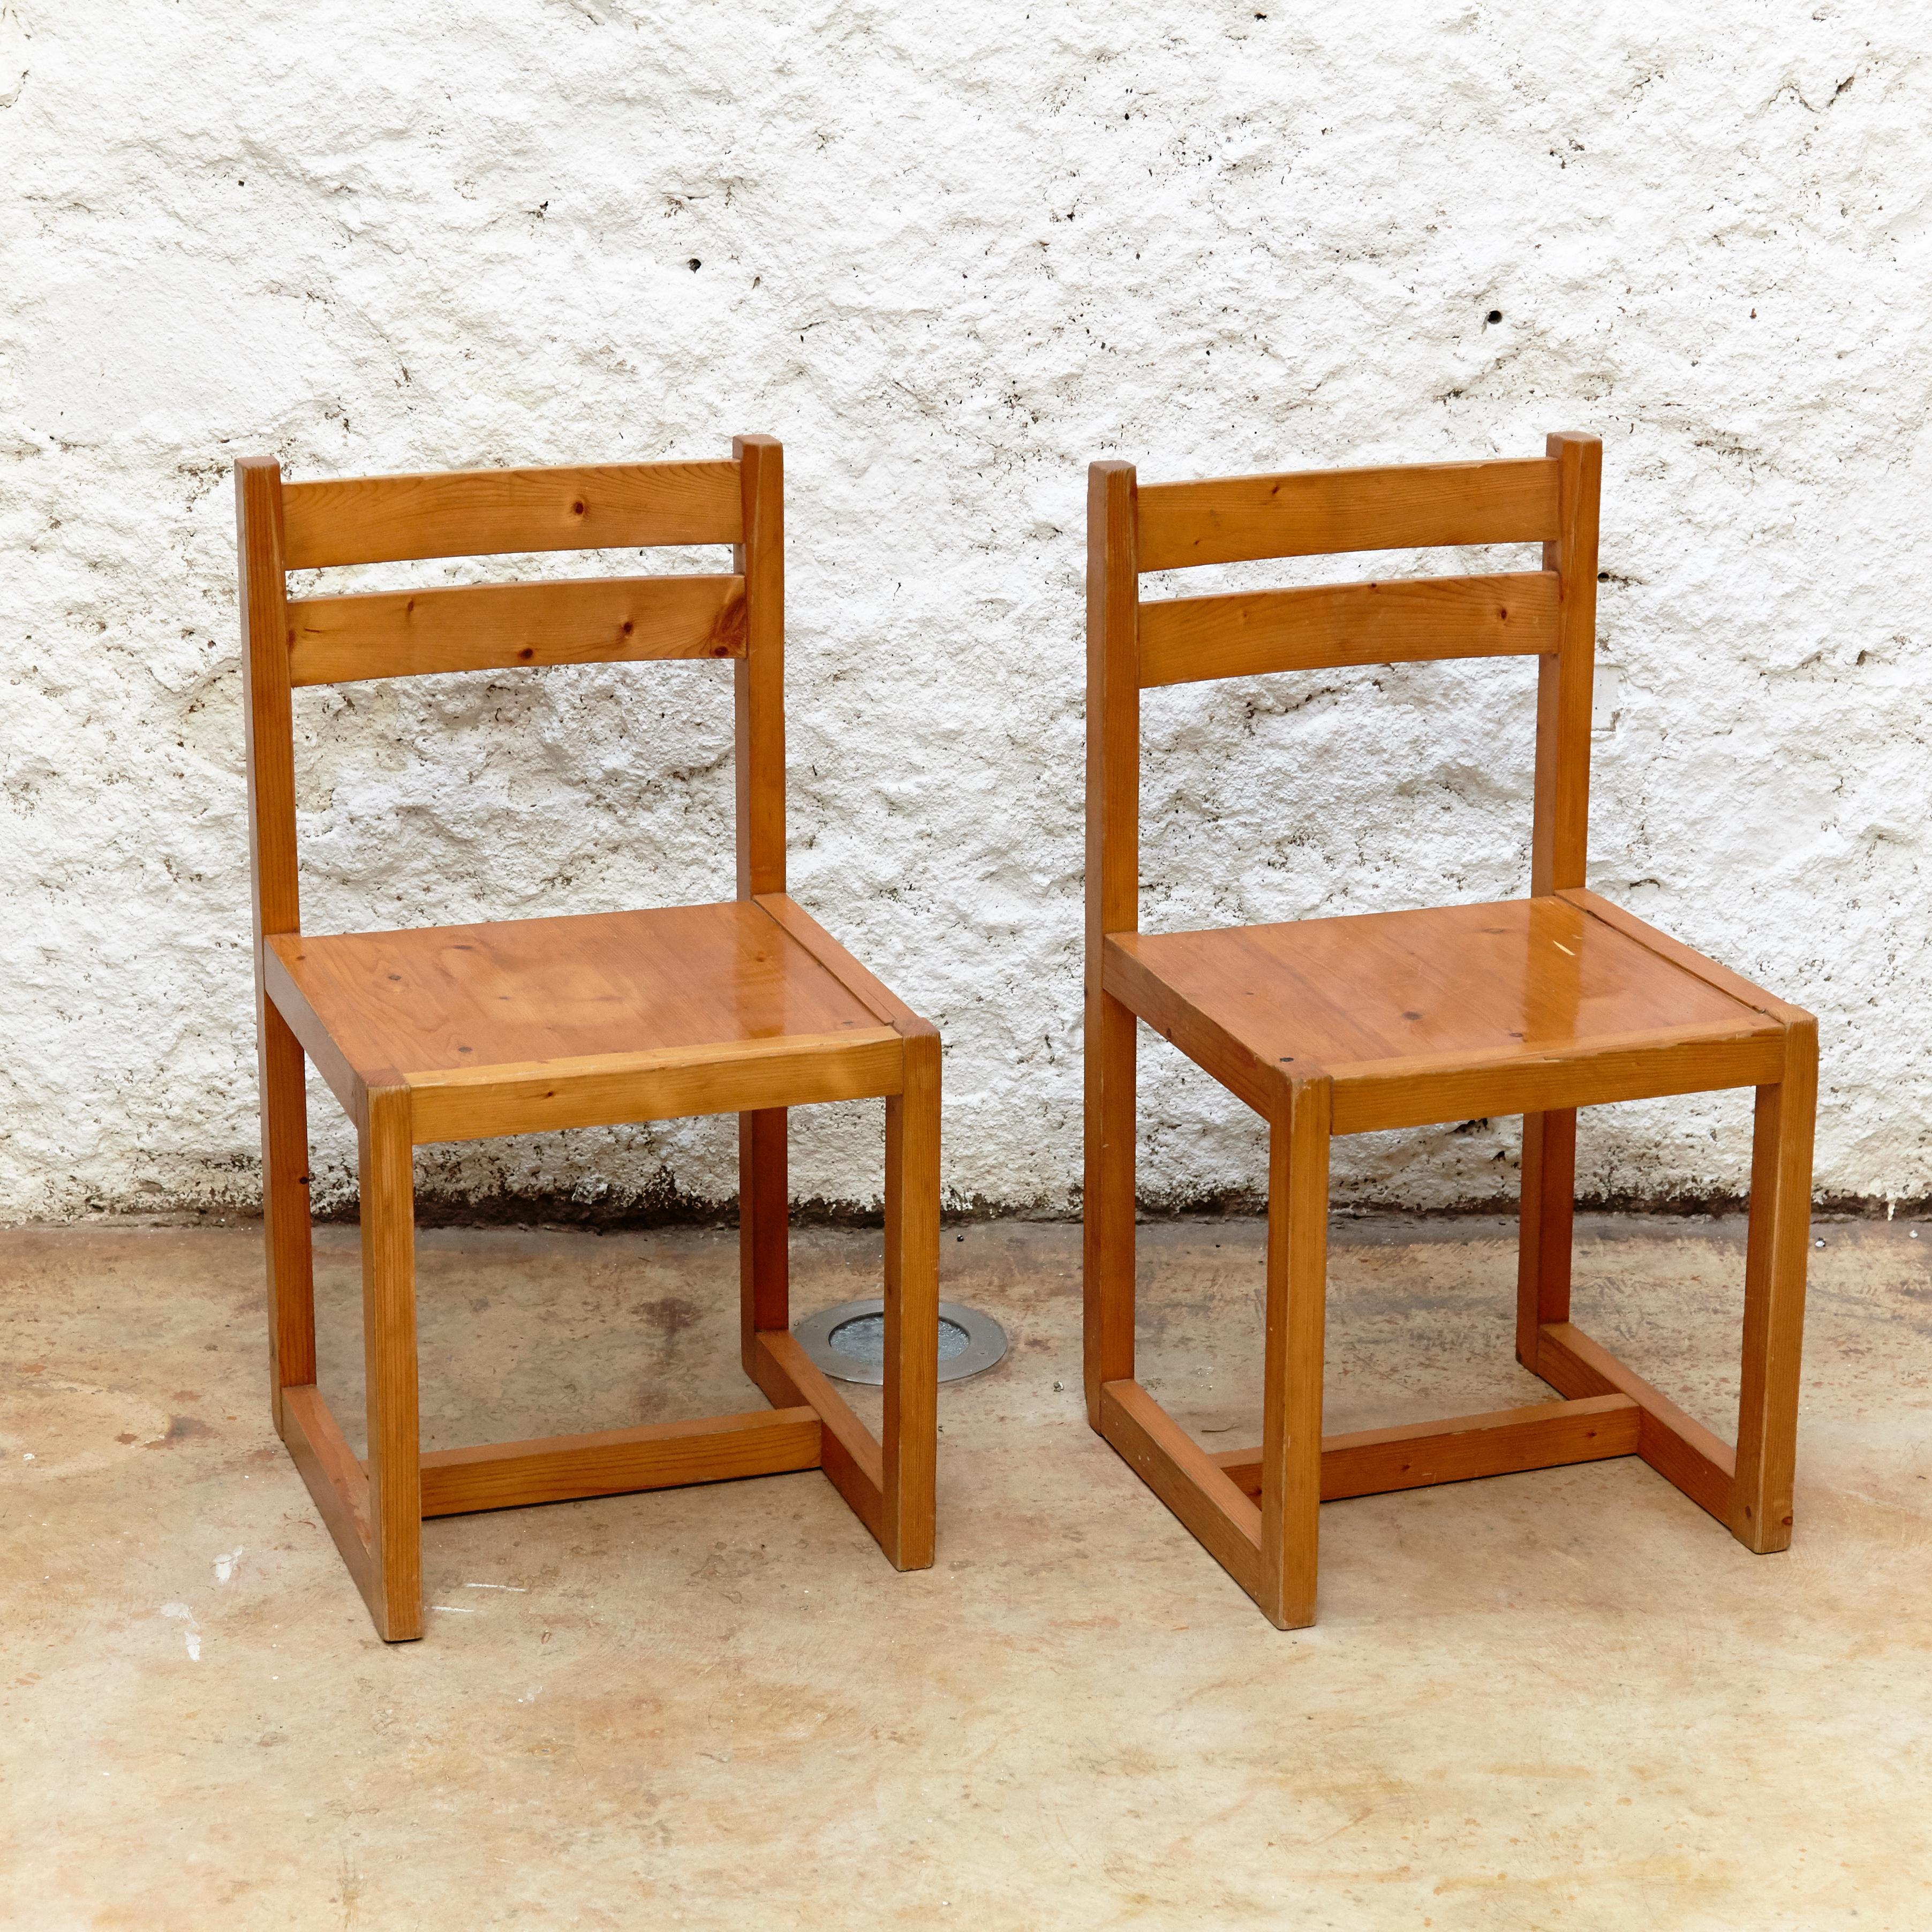 French Set of Four Mid-Century Modern Racionalist Wood Chairs from France, circa 1960